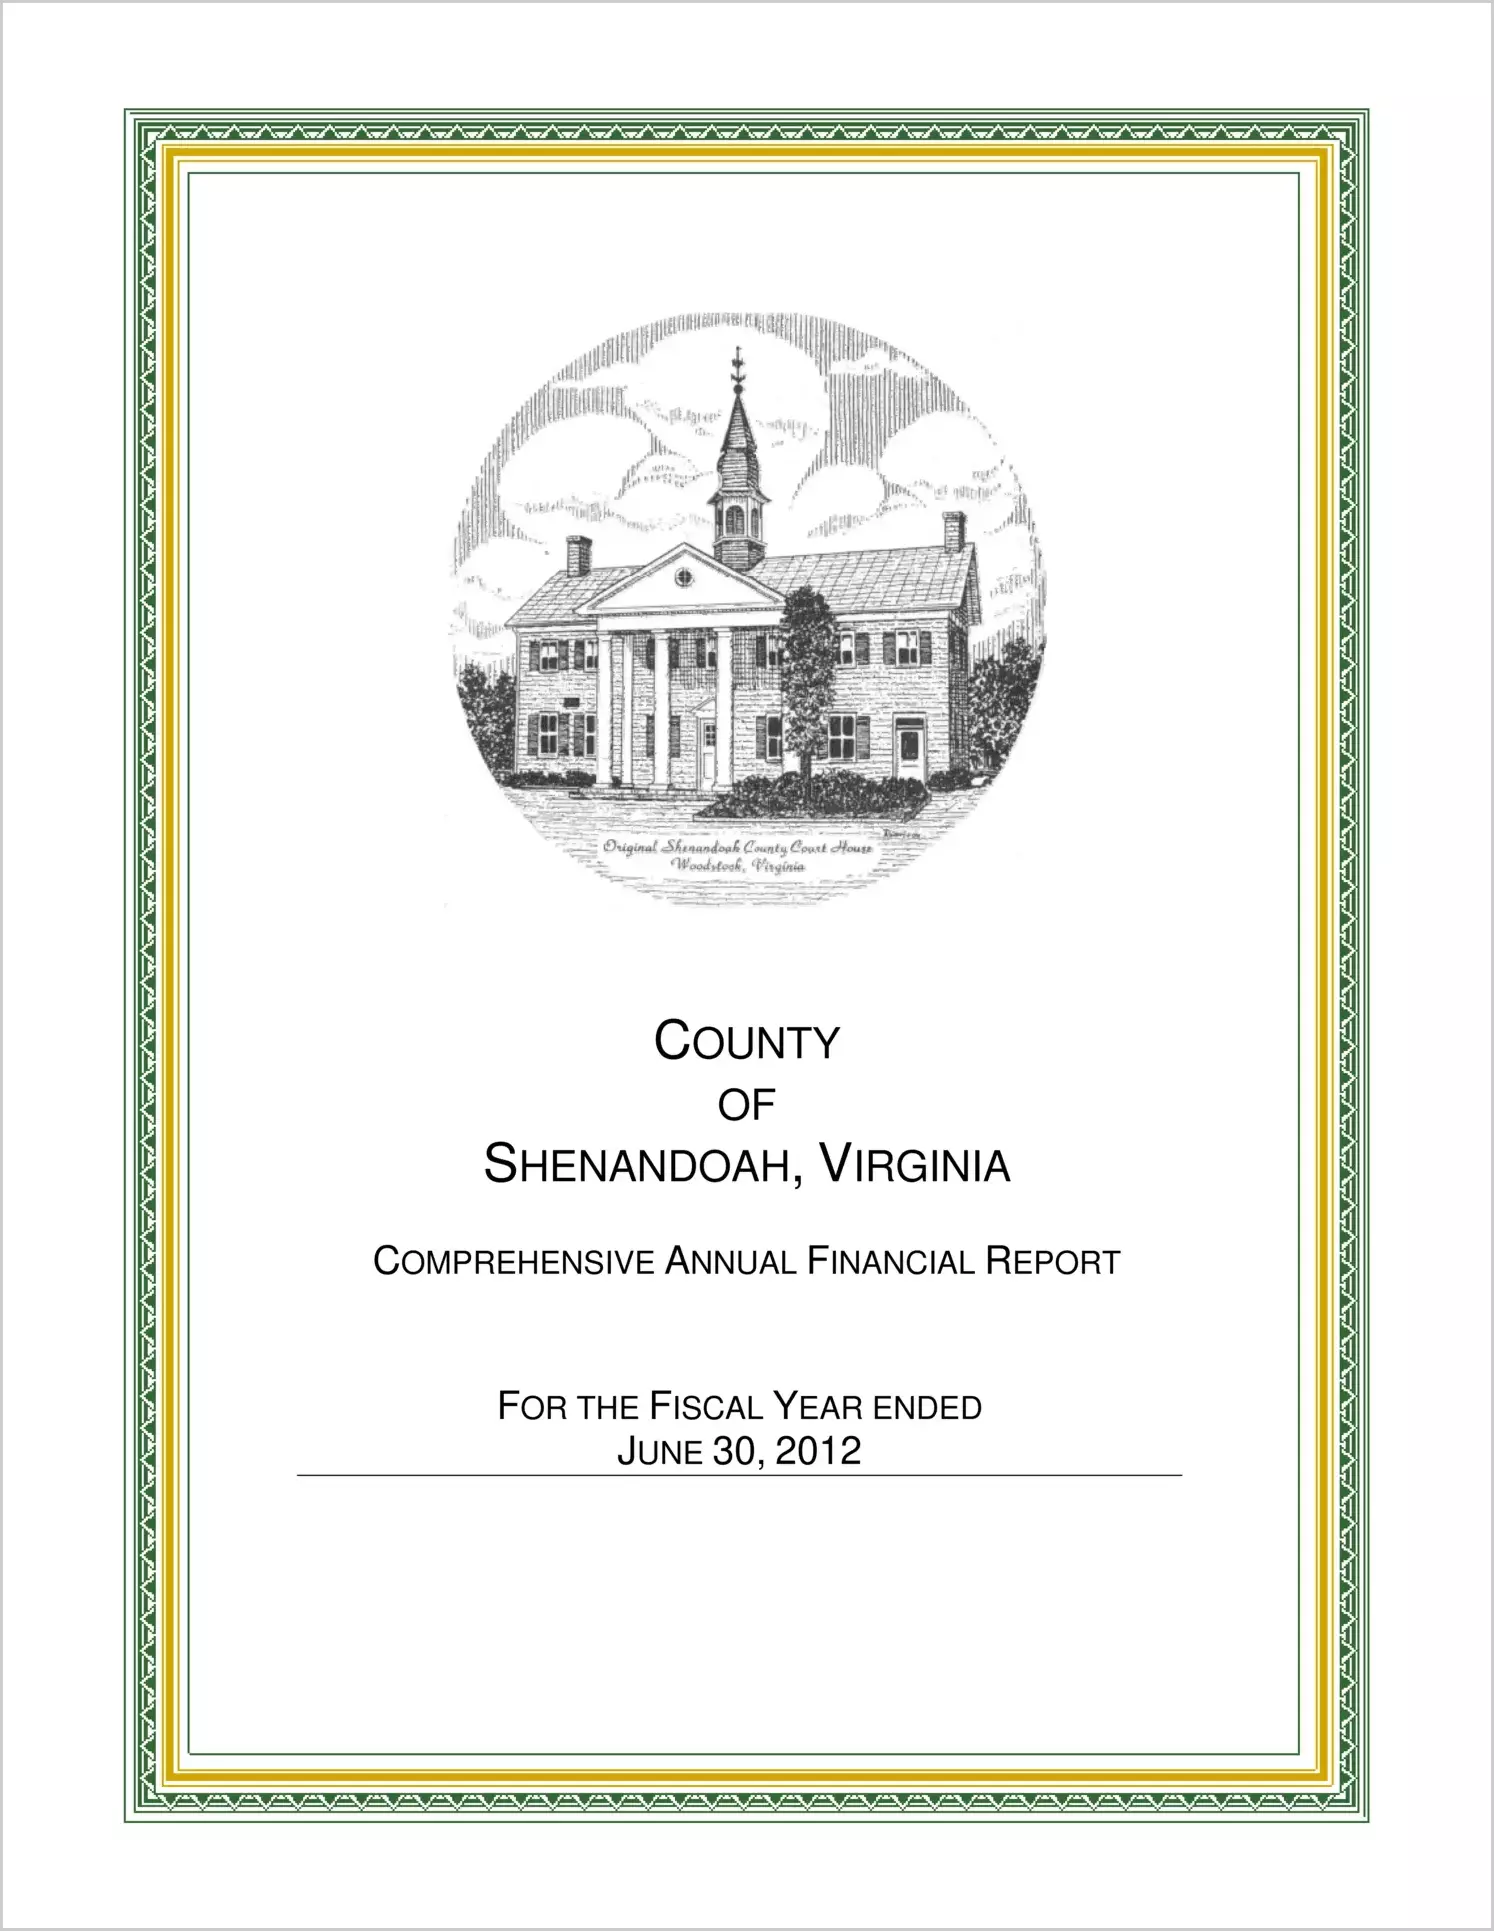 2012 Annual Financial Report for County of Shenandoah